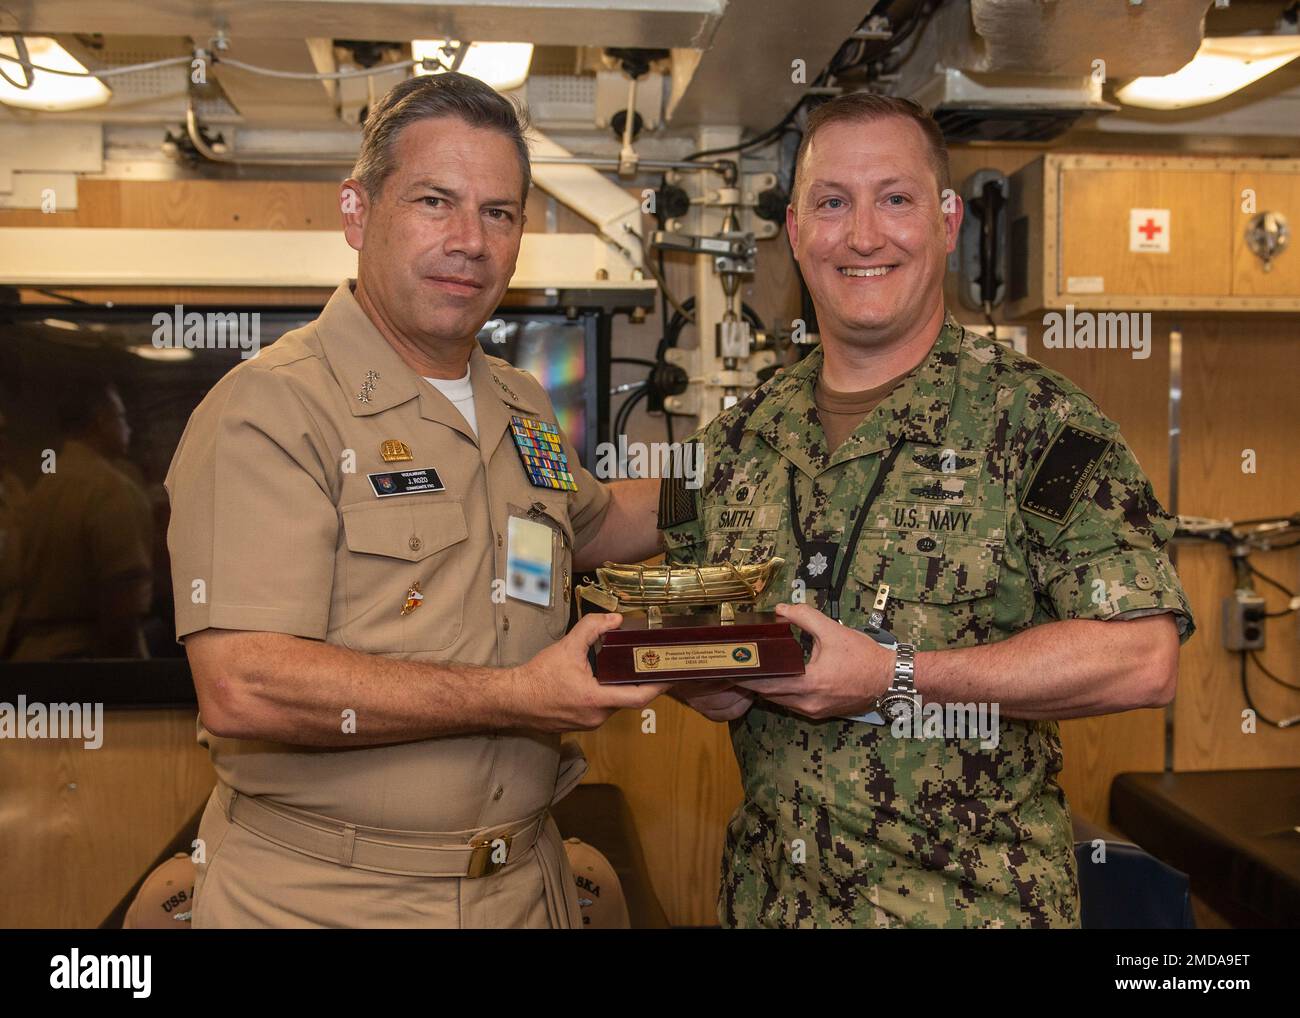 KINGS BAY, Ga. (July 14, 2022) Vice Adm. Juan Ricardo Rozo, Commander, Caribbean Naval Force, presents a gift to Cmdr. John Smith, commanding officer of the Ohio-class ballistic-missile submarine USS Alaska (SSBN 732) Blue Crew (right), during a visit aboard the ship. The visit to Naval Submarine Base Kings Bay, Georgia was part of the Diesel Electric Submarine Initiative (DESI) between the United States and partner nations. DESI is a program designed to train crews and test capabilities in Anti-Submarine Warfare between nuclear-powered and diesel-electric submarines. Stock Photo